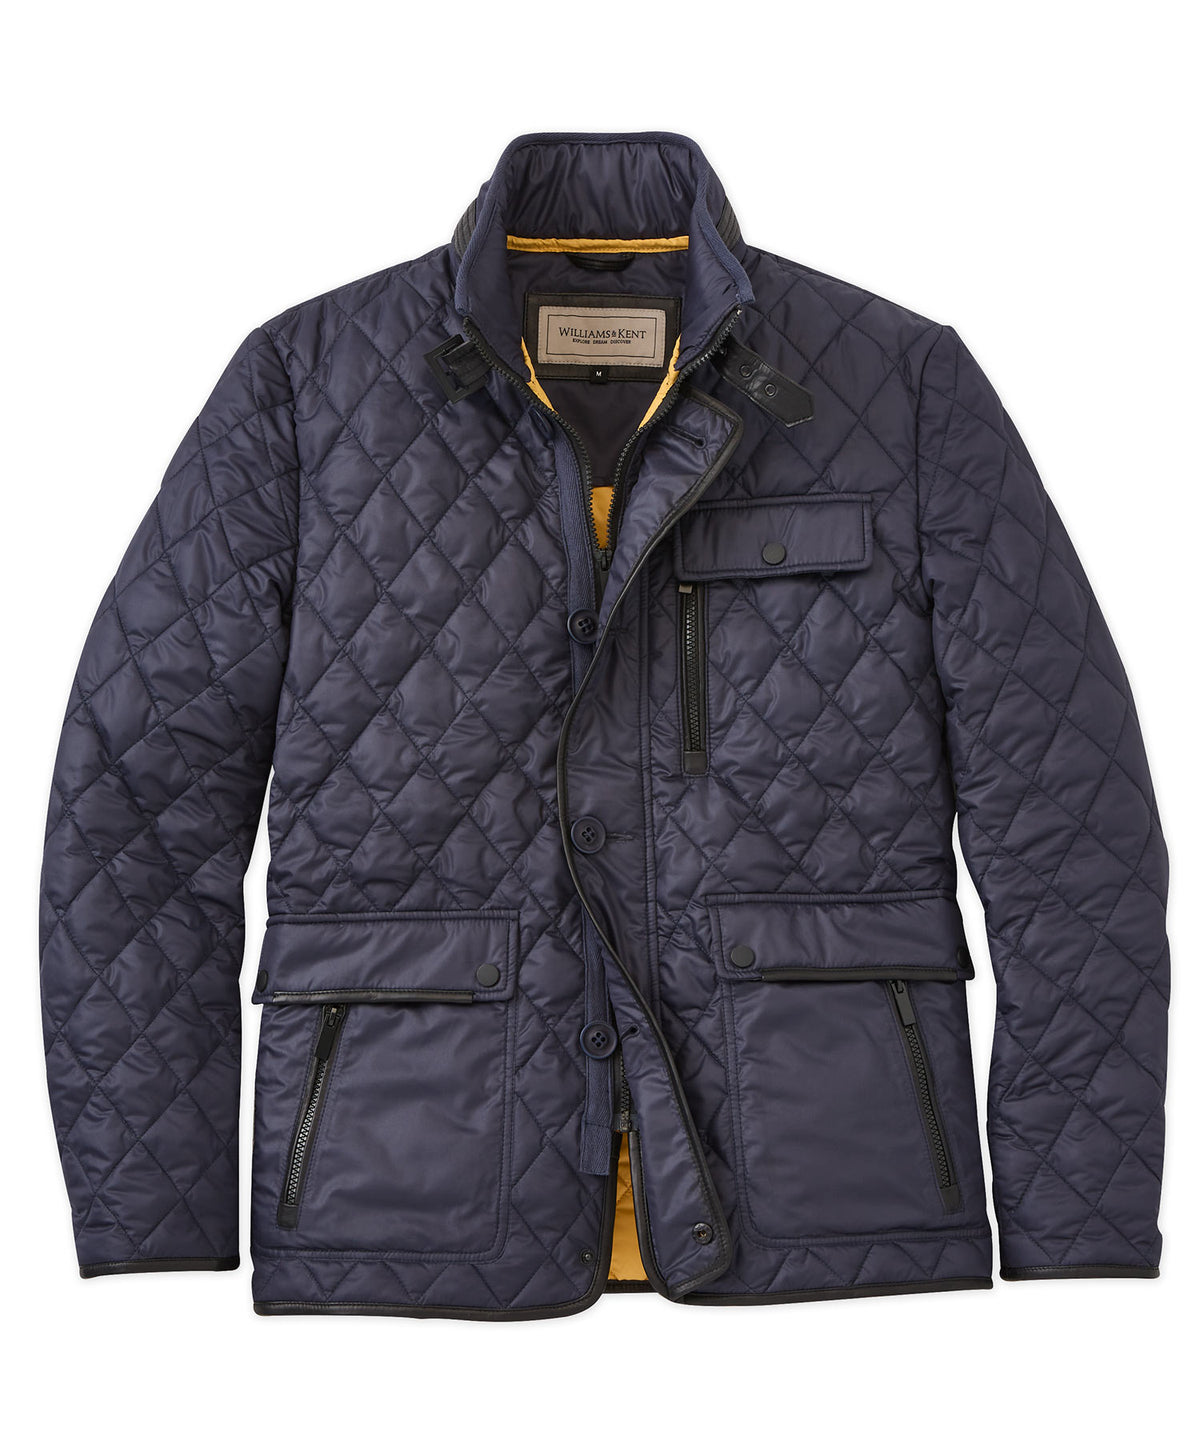 Major Diamond-Quilted Jacket